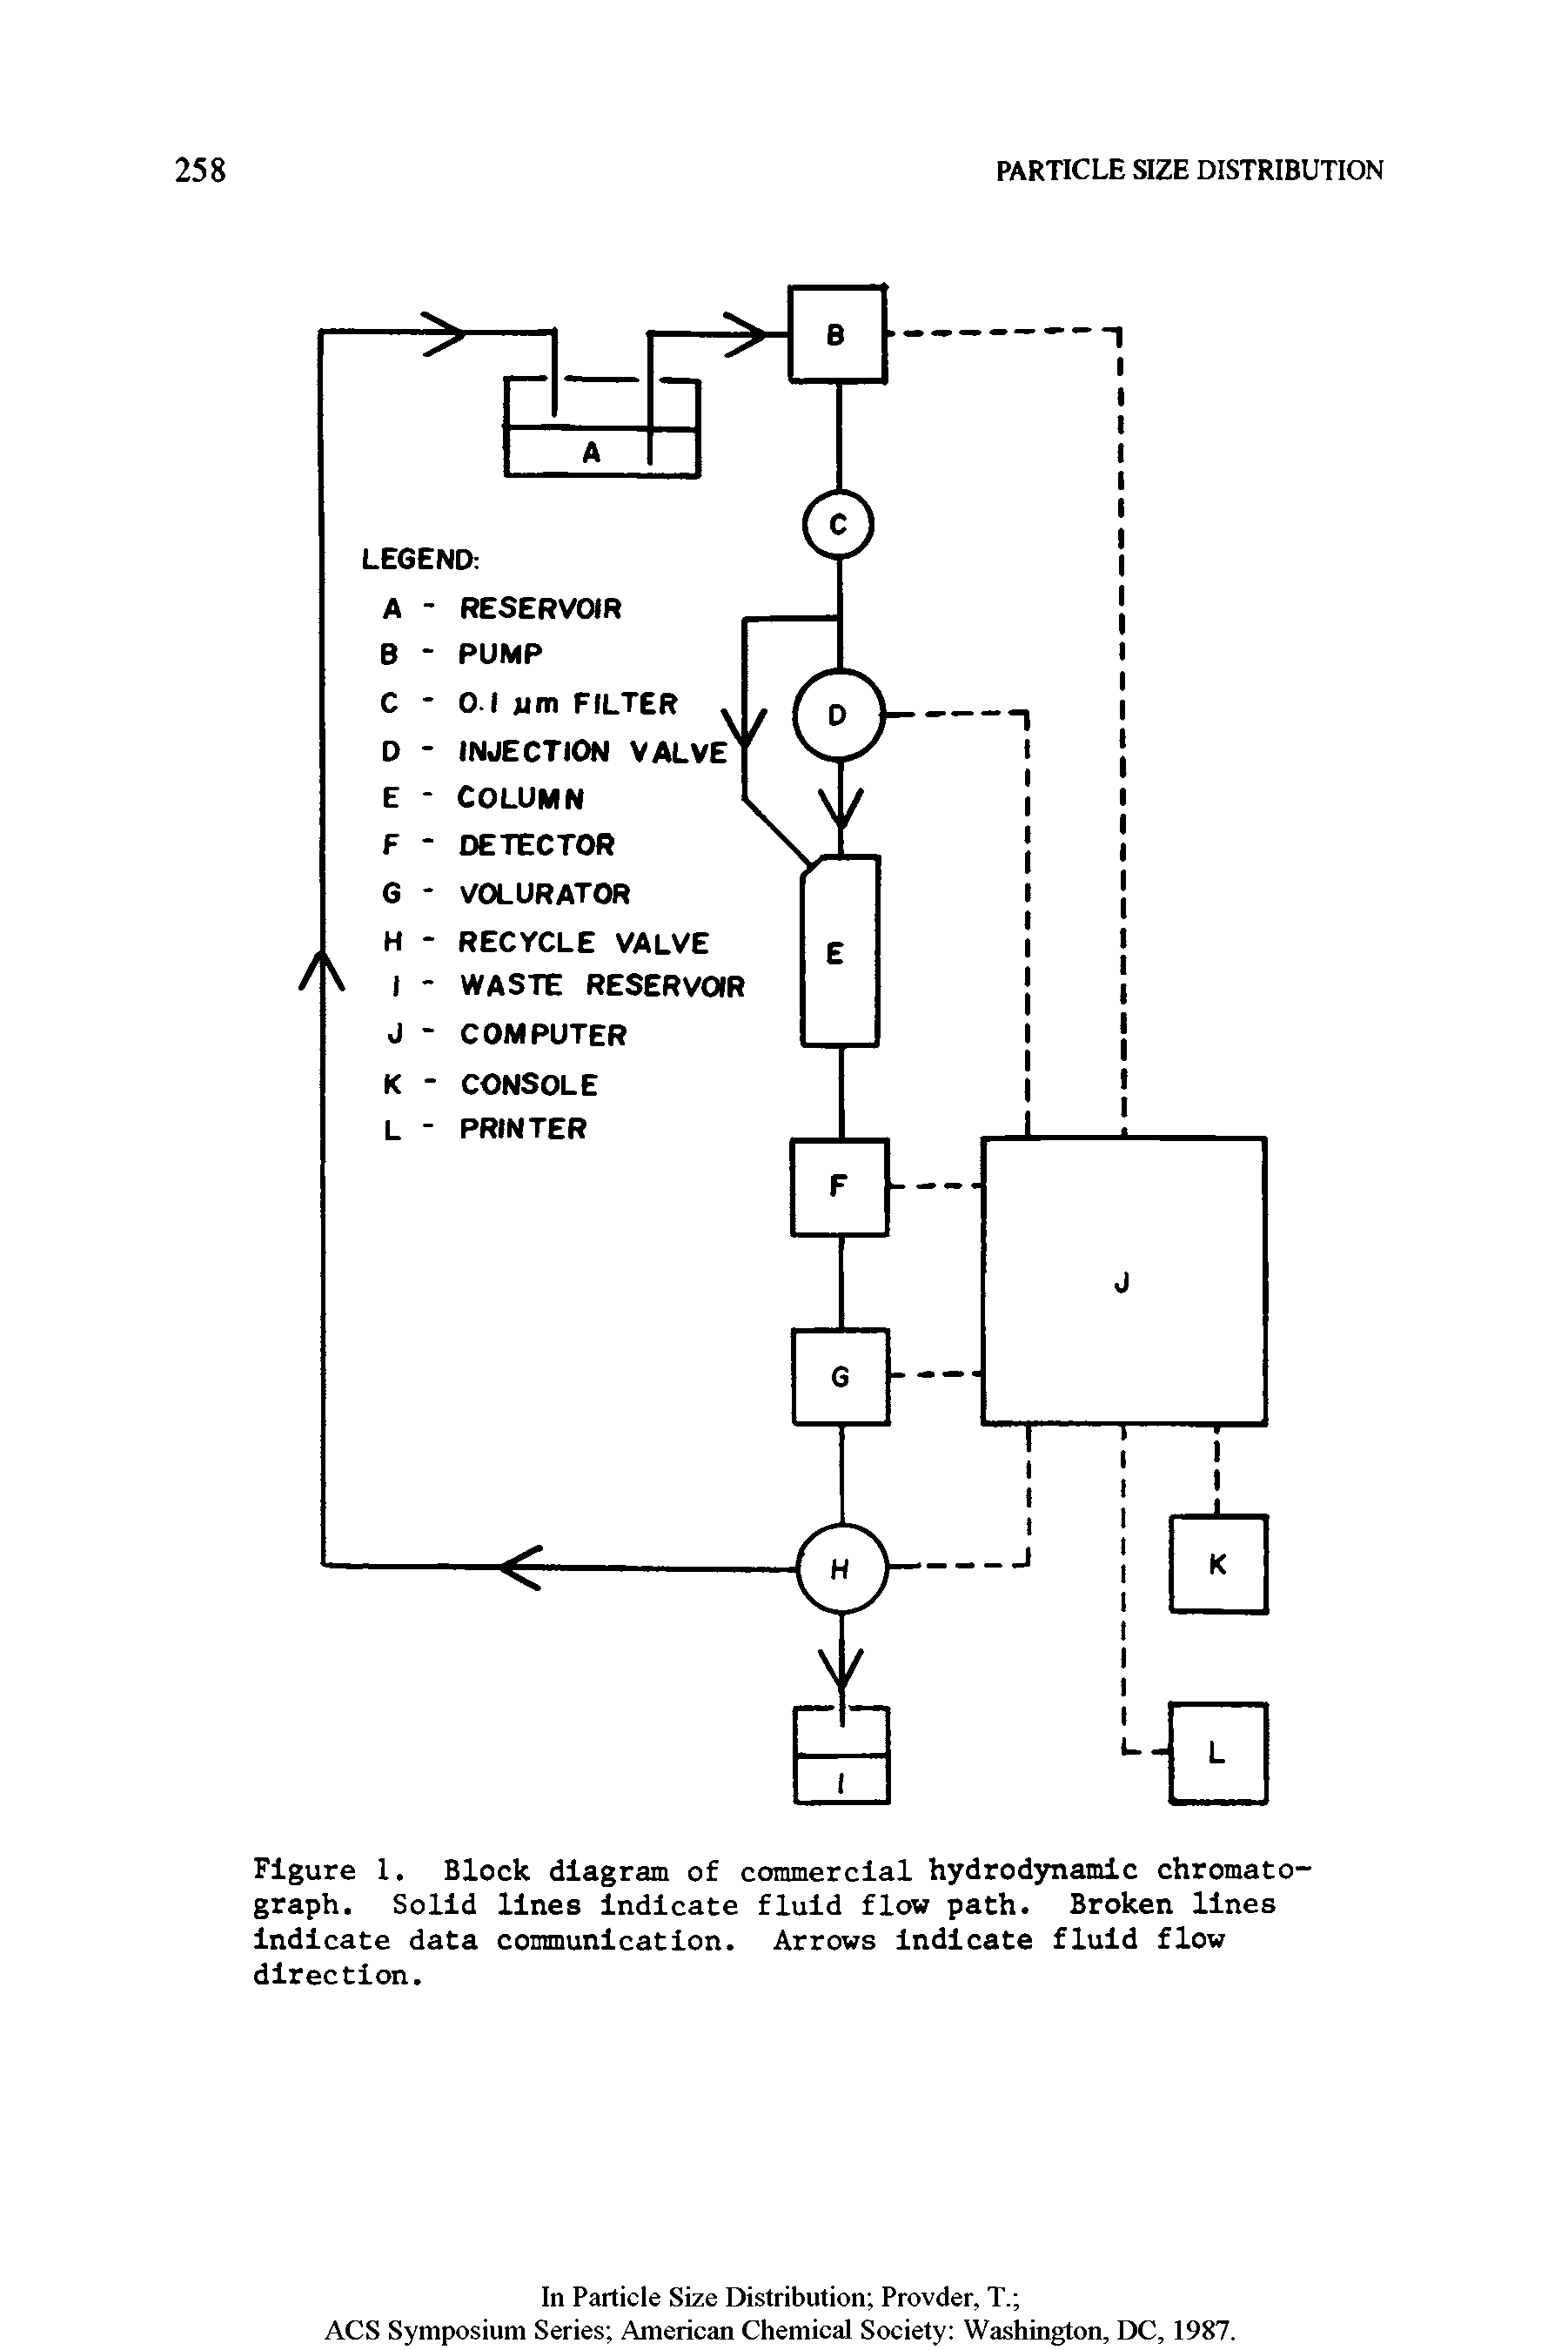 Figure 1. Block diagram of commercial hydrodynamic chromatograph. Solid lines indicate fluid flow path. Broken lines indicate data communication. Arrows indicate fluid flow direction.